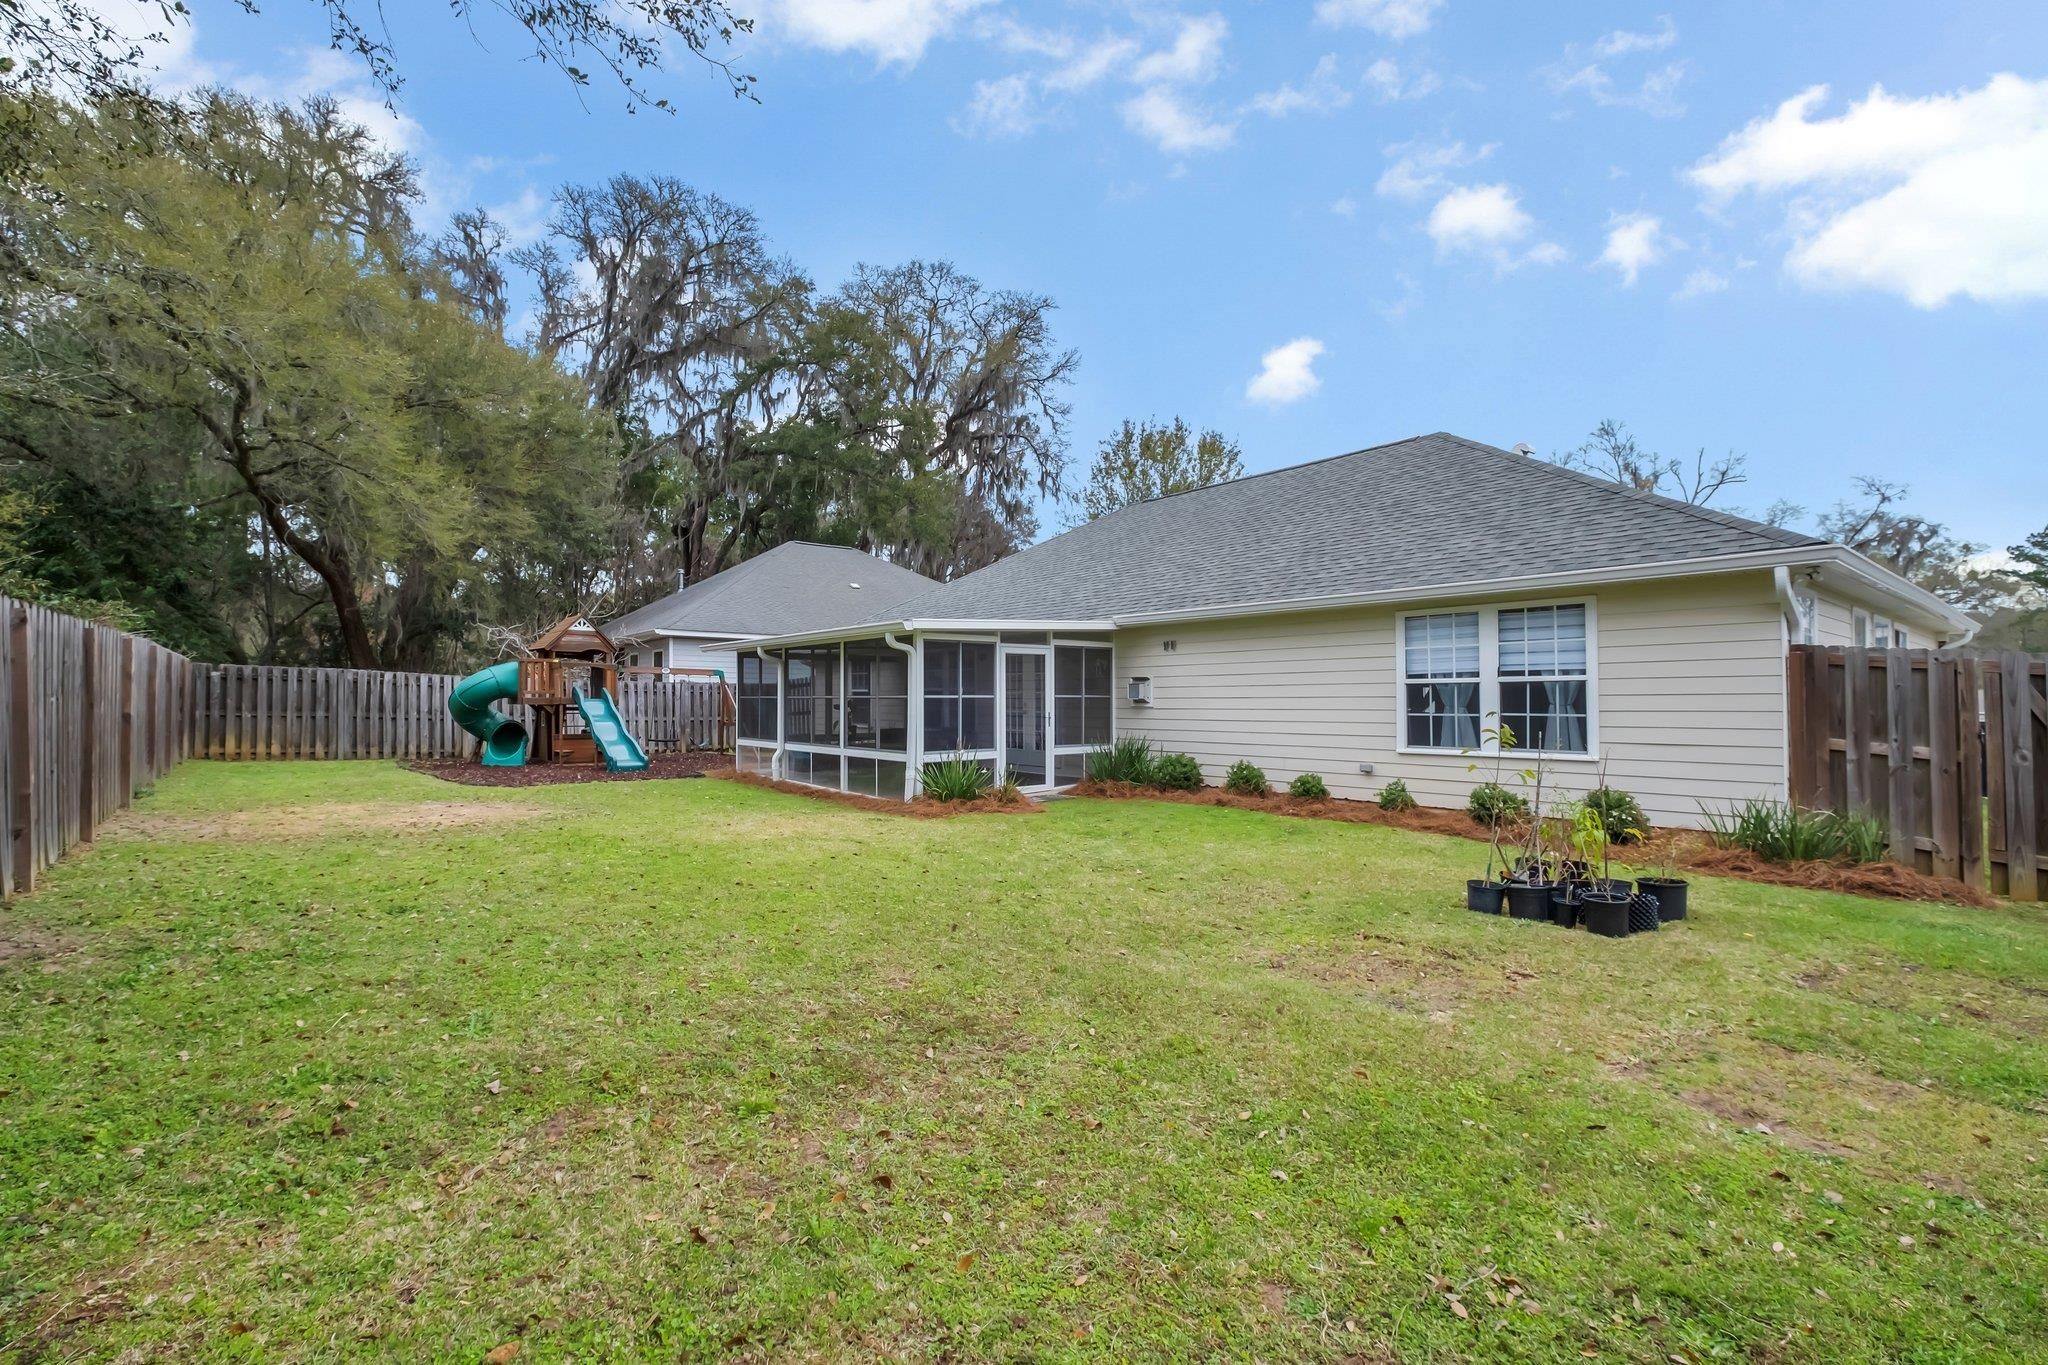 1104 March Road,TALLAHASSEE,Florida 32311,4 Bedrooms Bedrooms,2 BathroomsBathrooms,Detached single family,1104 March Road,369244